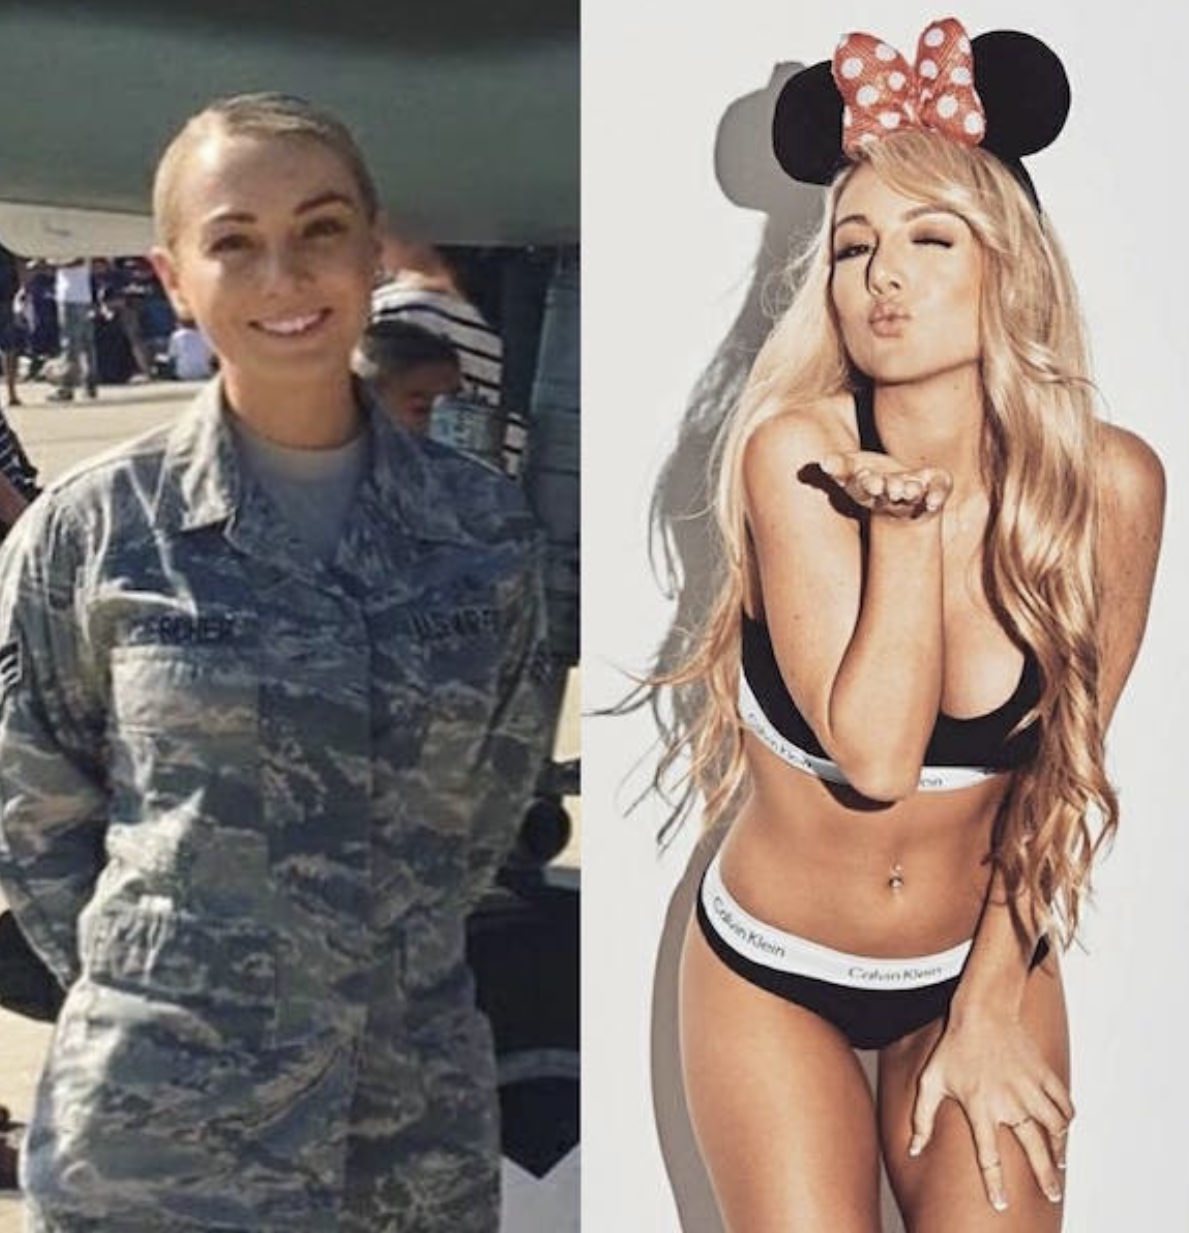 Military babe in uniform and a picture of her wearing Minnie mouse ears, bra and panties, blowing a kiss